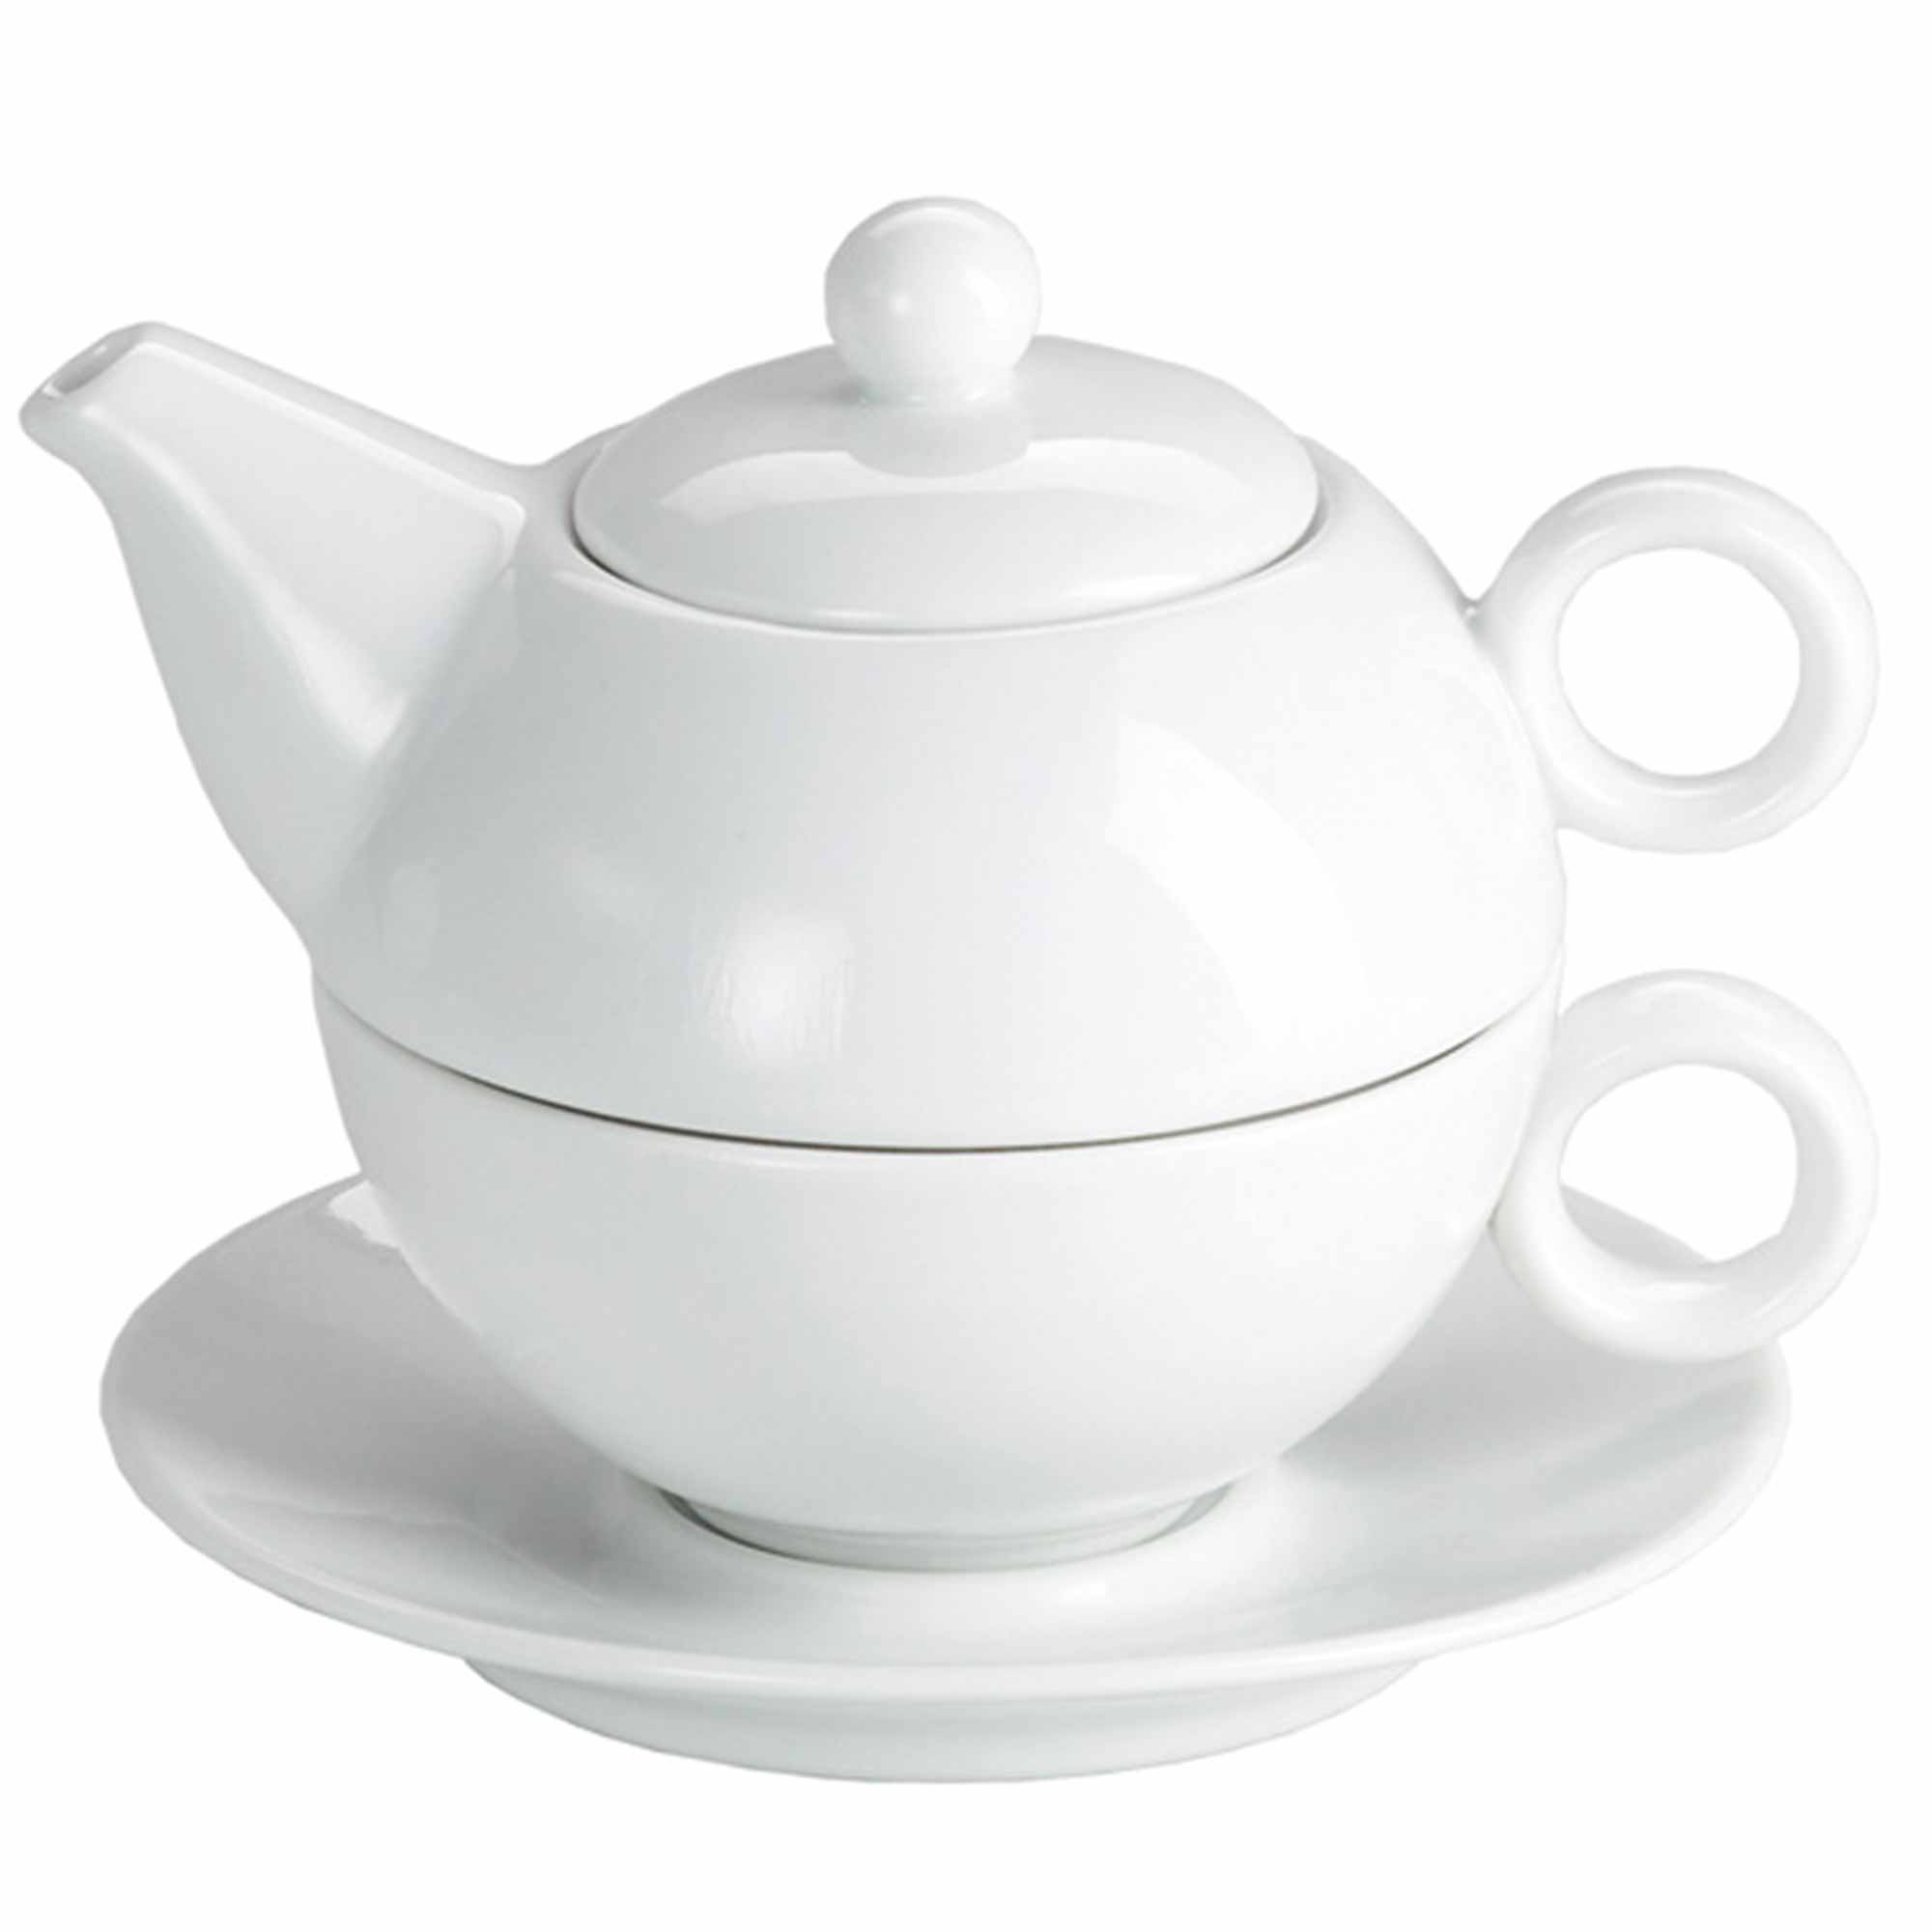 Moonlight White Tea For One Teapot and Cup Set 250ml